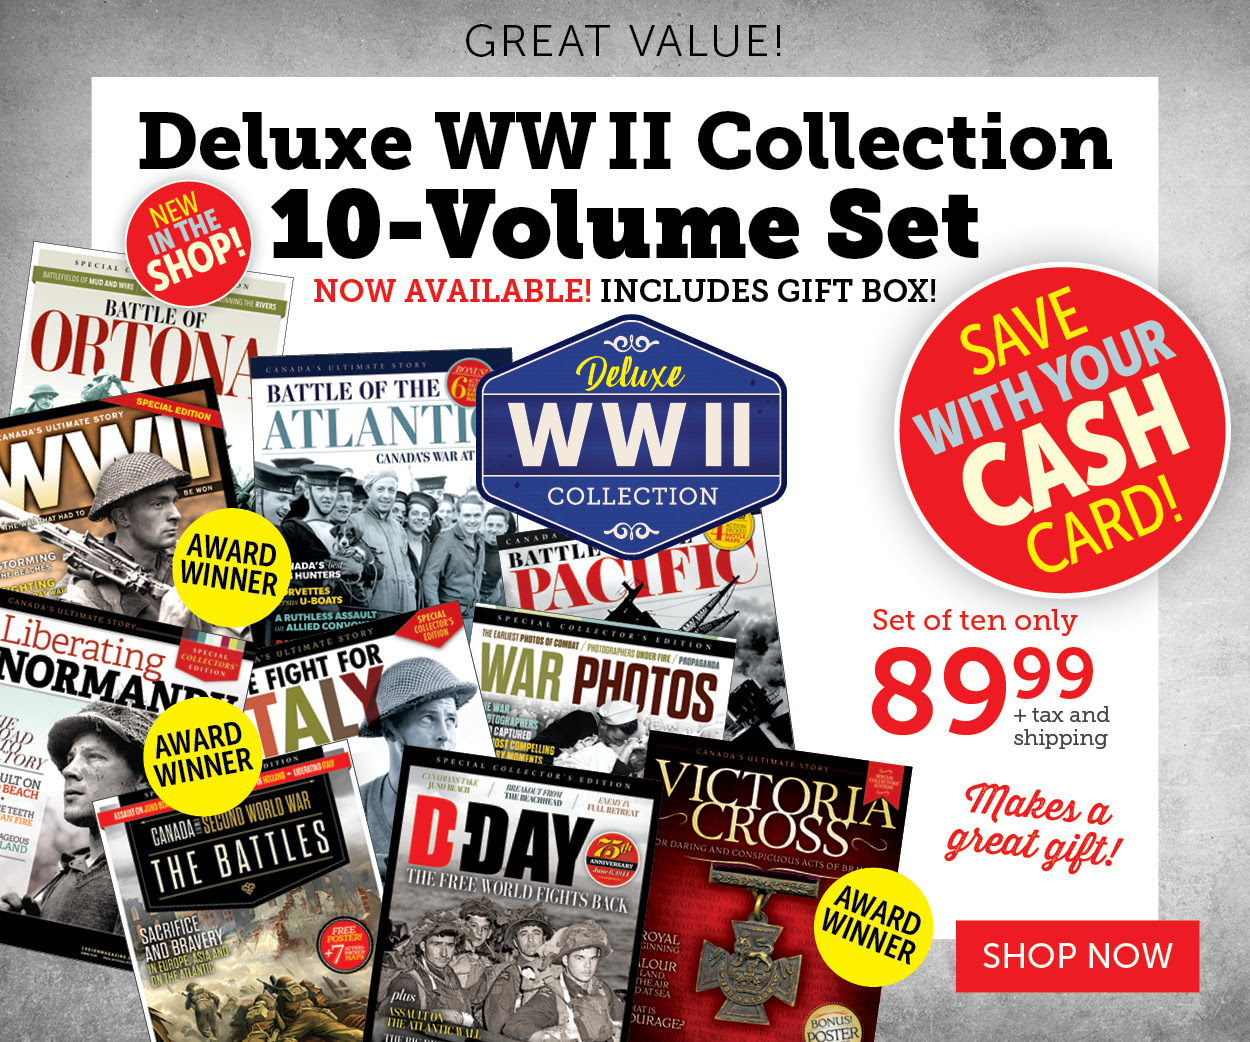 Deluxe WWII Collection 10-Volume Set